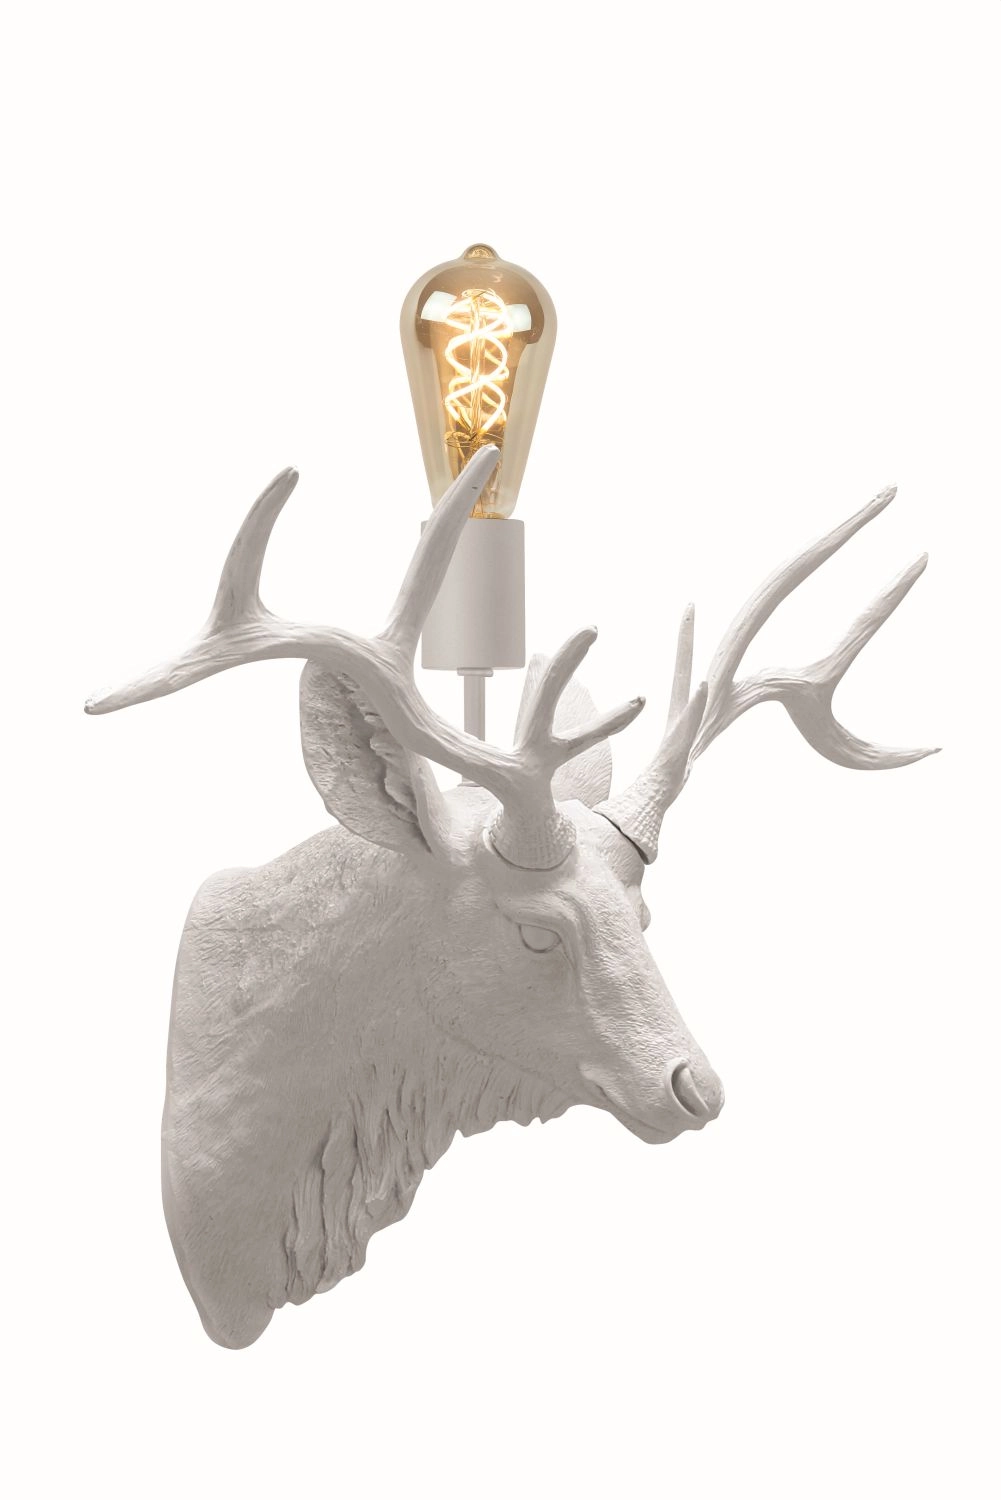 LU 47210/01/31 Lucide EXTRAVAGANZA CARIBOU - Wall light - 1xE27 - White